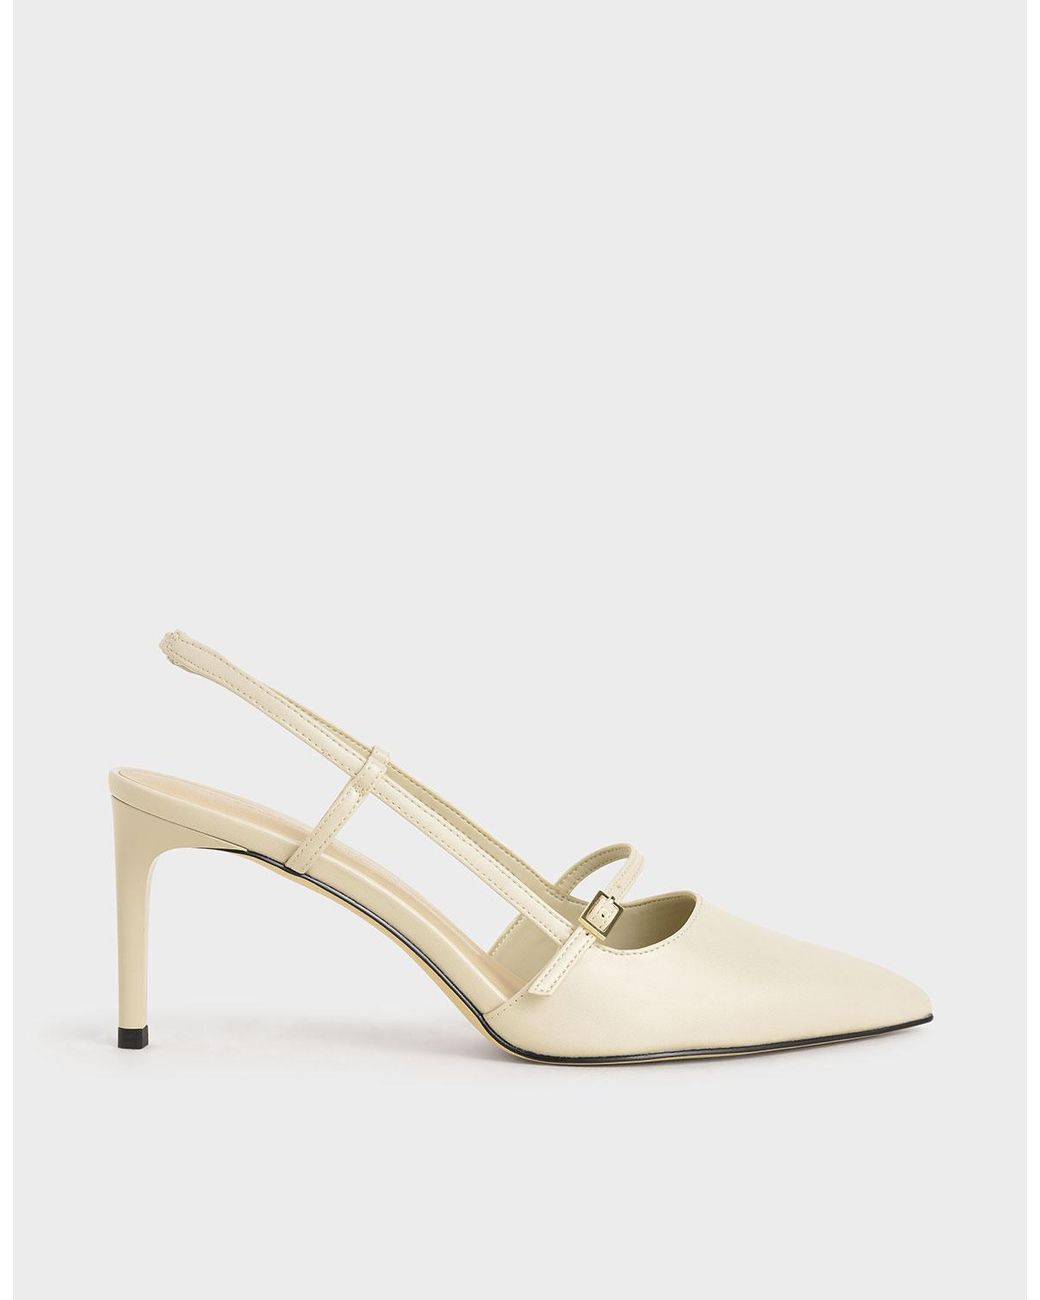 Charles & Keith Mary Jane Slingback Pumps - Lyst